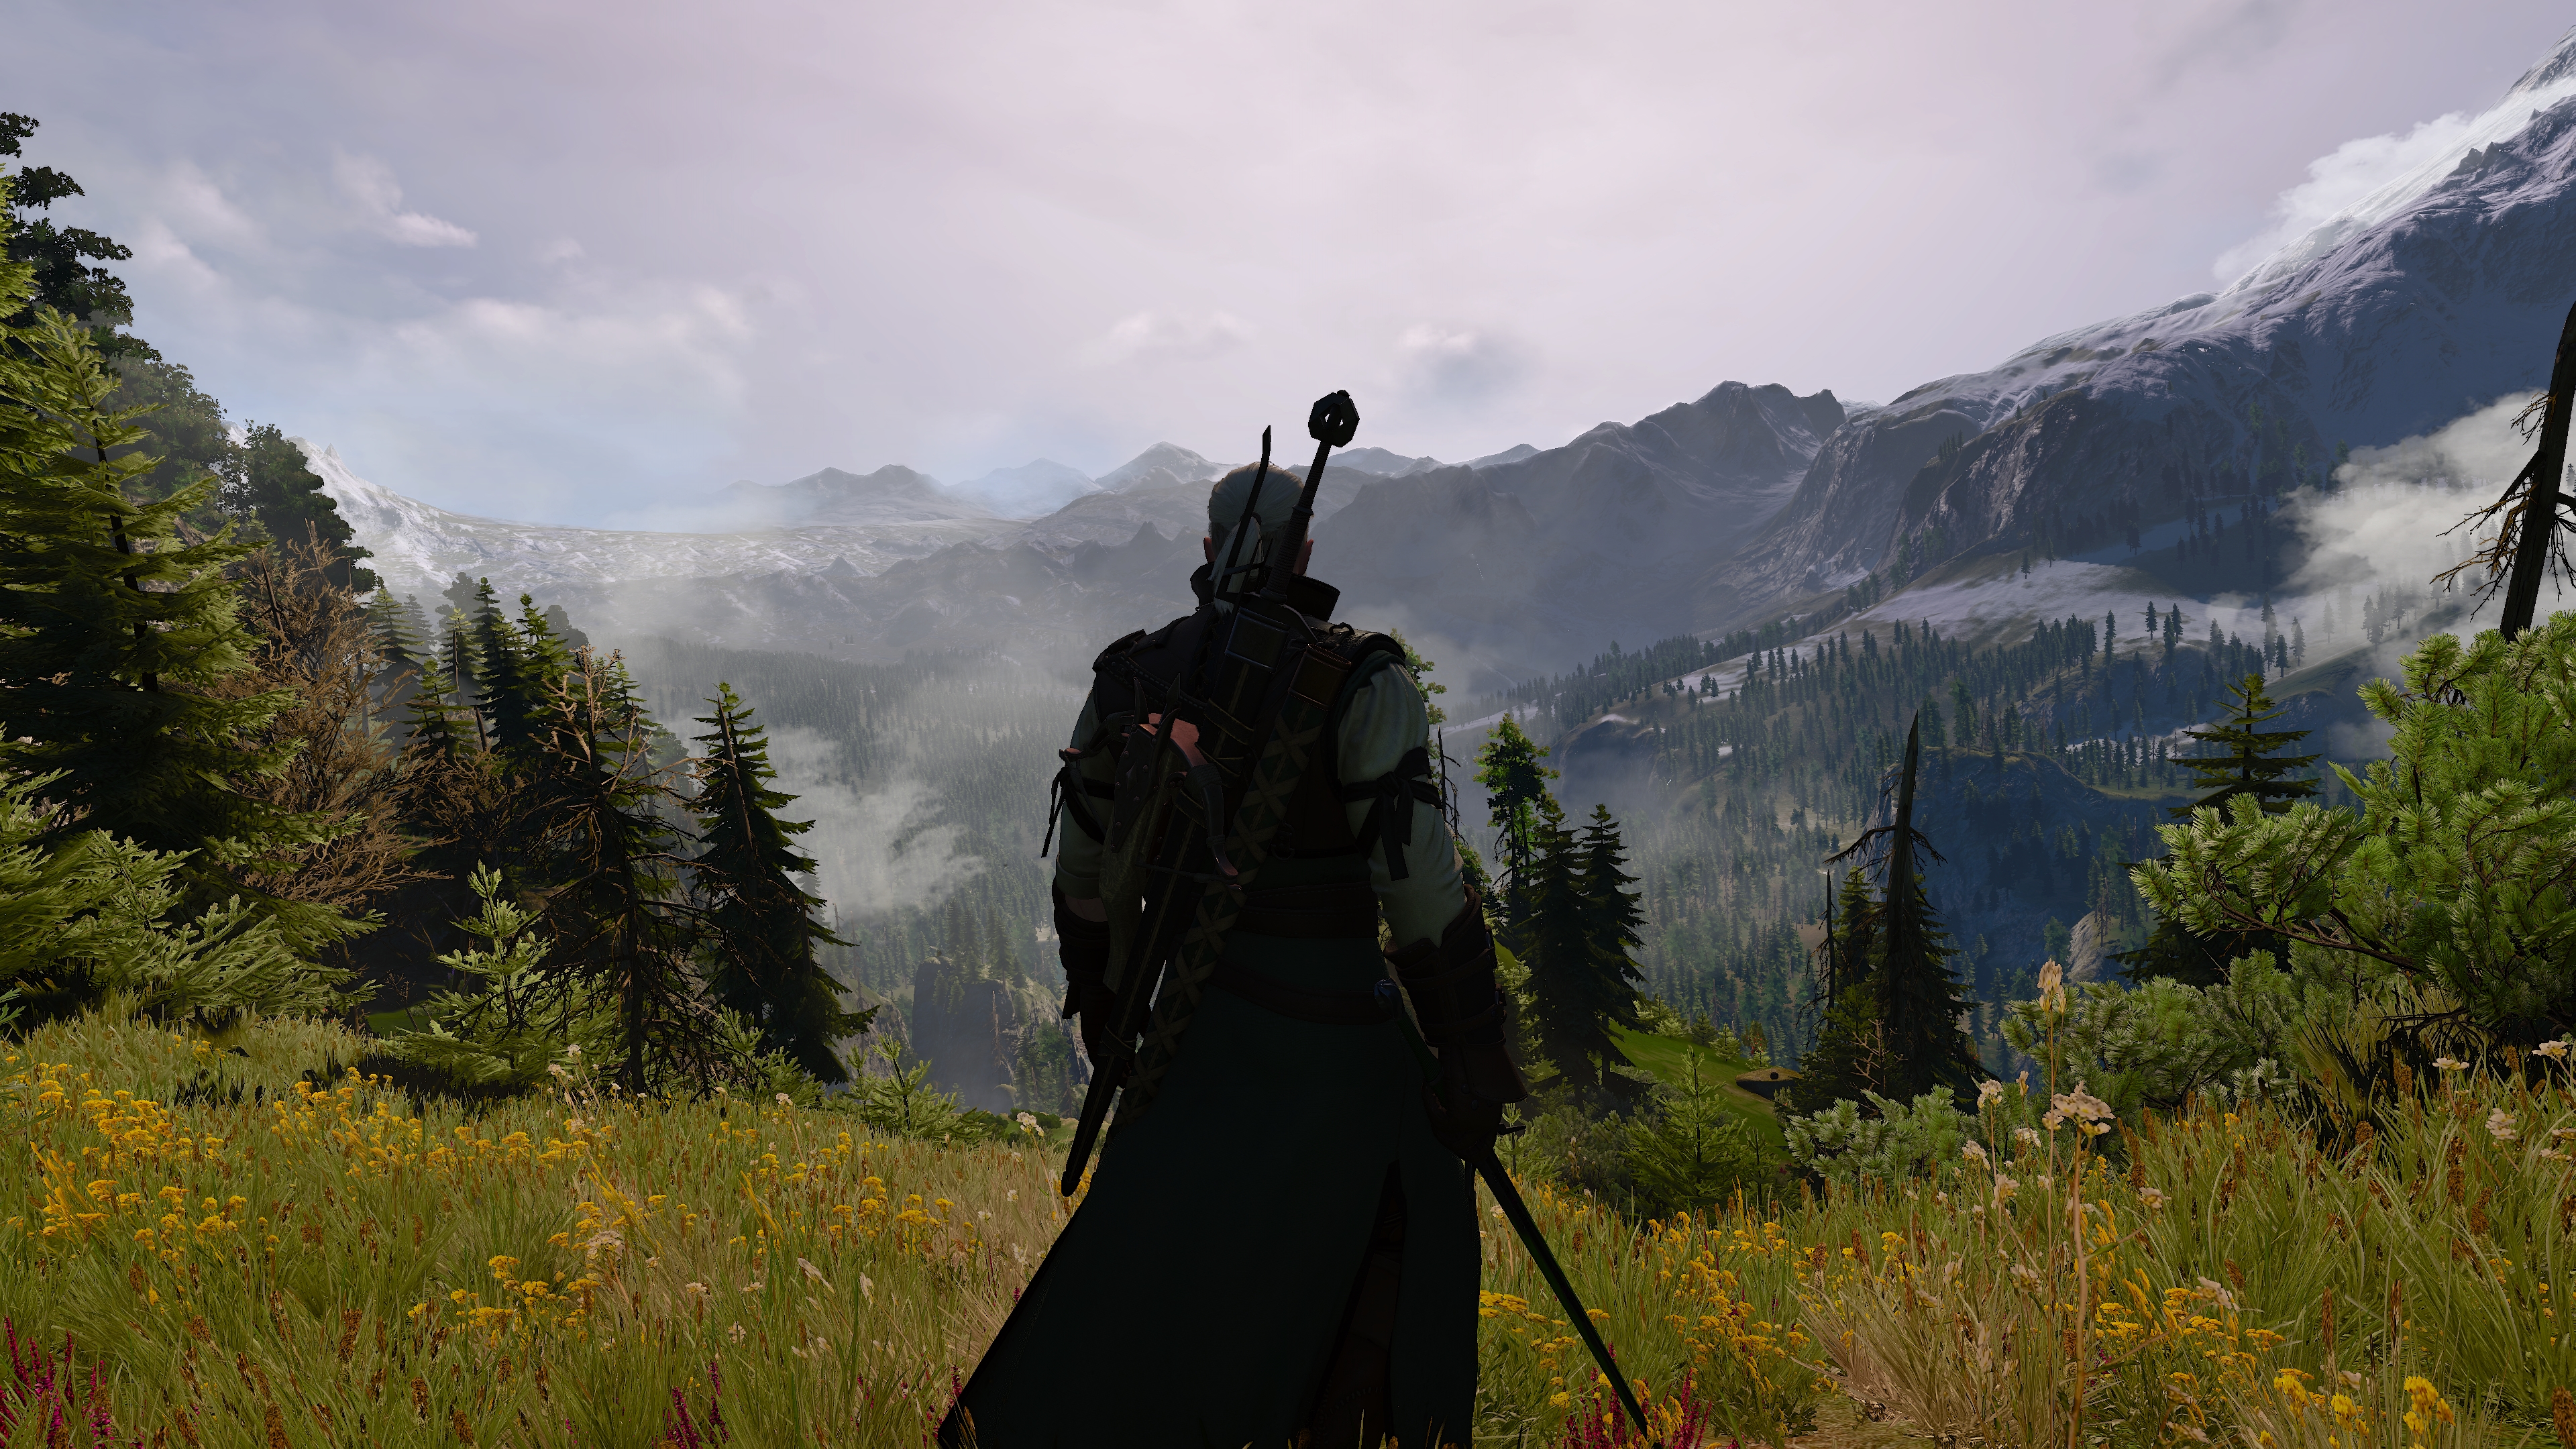 The Witcher 3 Wild Hunt Geralt Of Rivia Screen Shot Video Games PC Gaming Landscape Mountains RPG 3840x2160